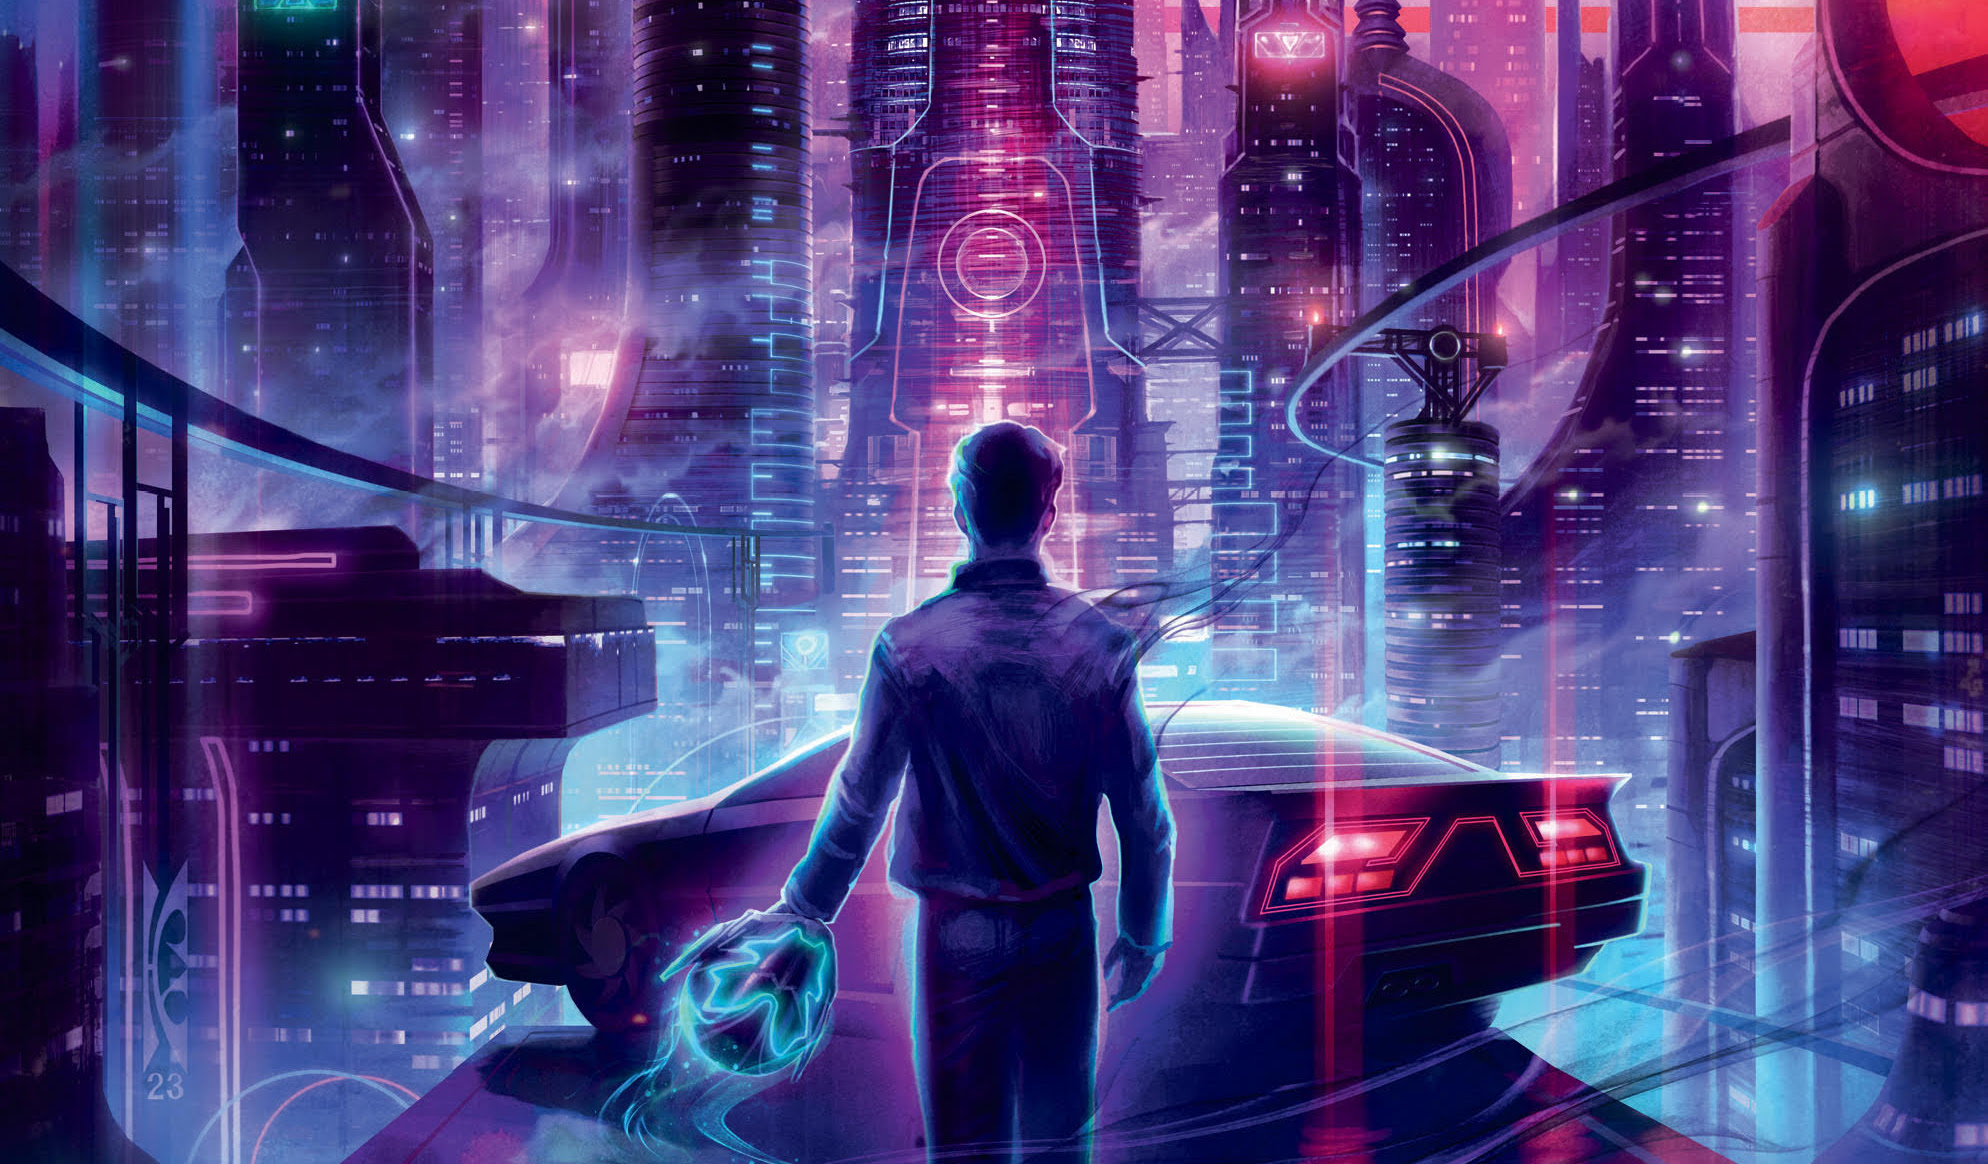 1980s nostalgia and cyberpunk style infuse in 'The Midnight: Shadows'